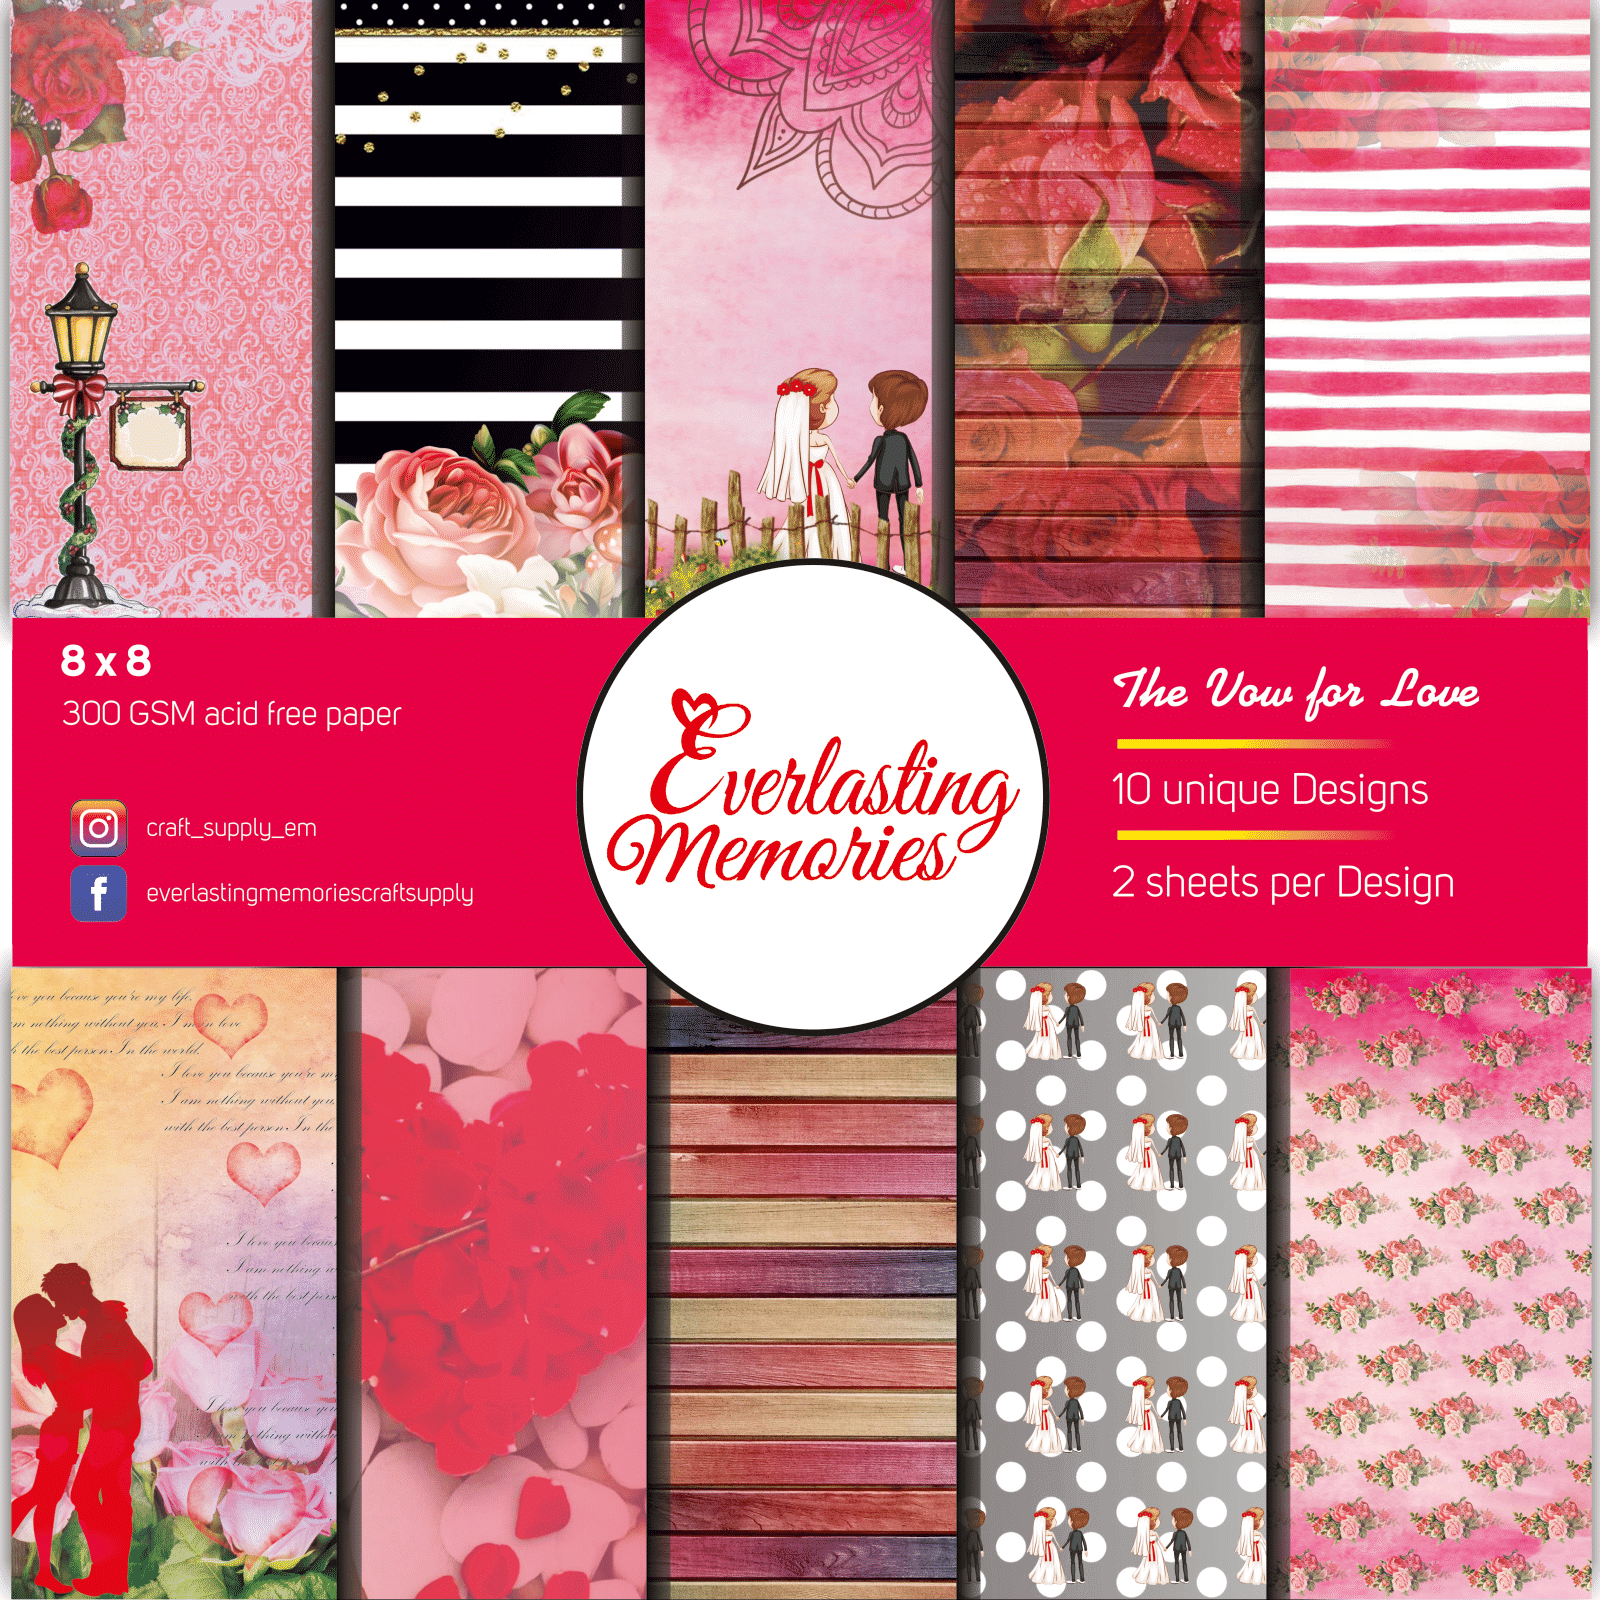 300 GSM paper cardstock | crafting | Love pattern sheets | The Vow For Love pattern paper – 8*8